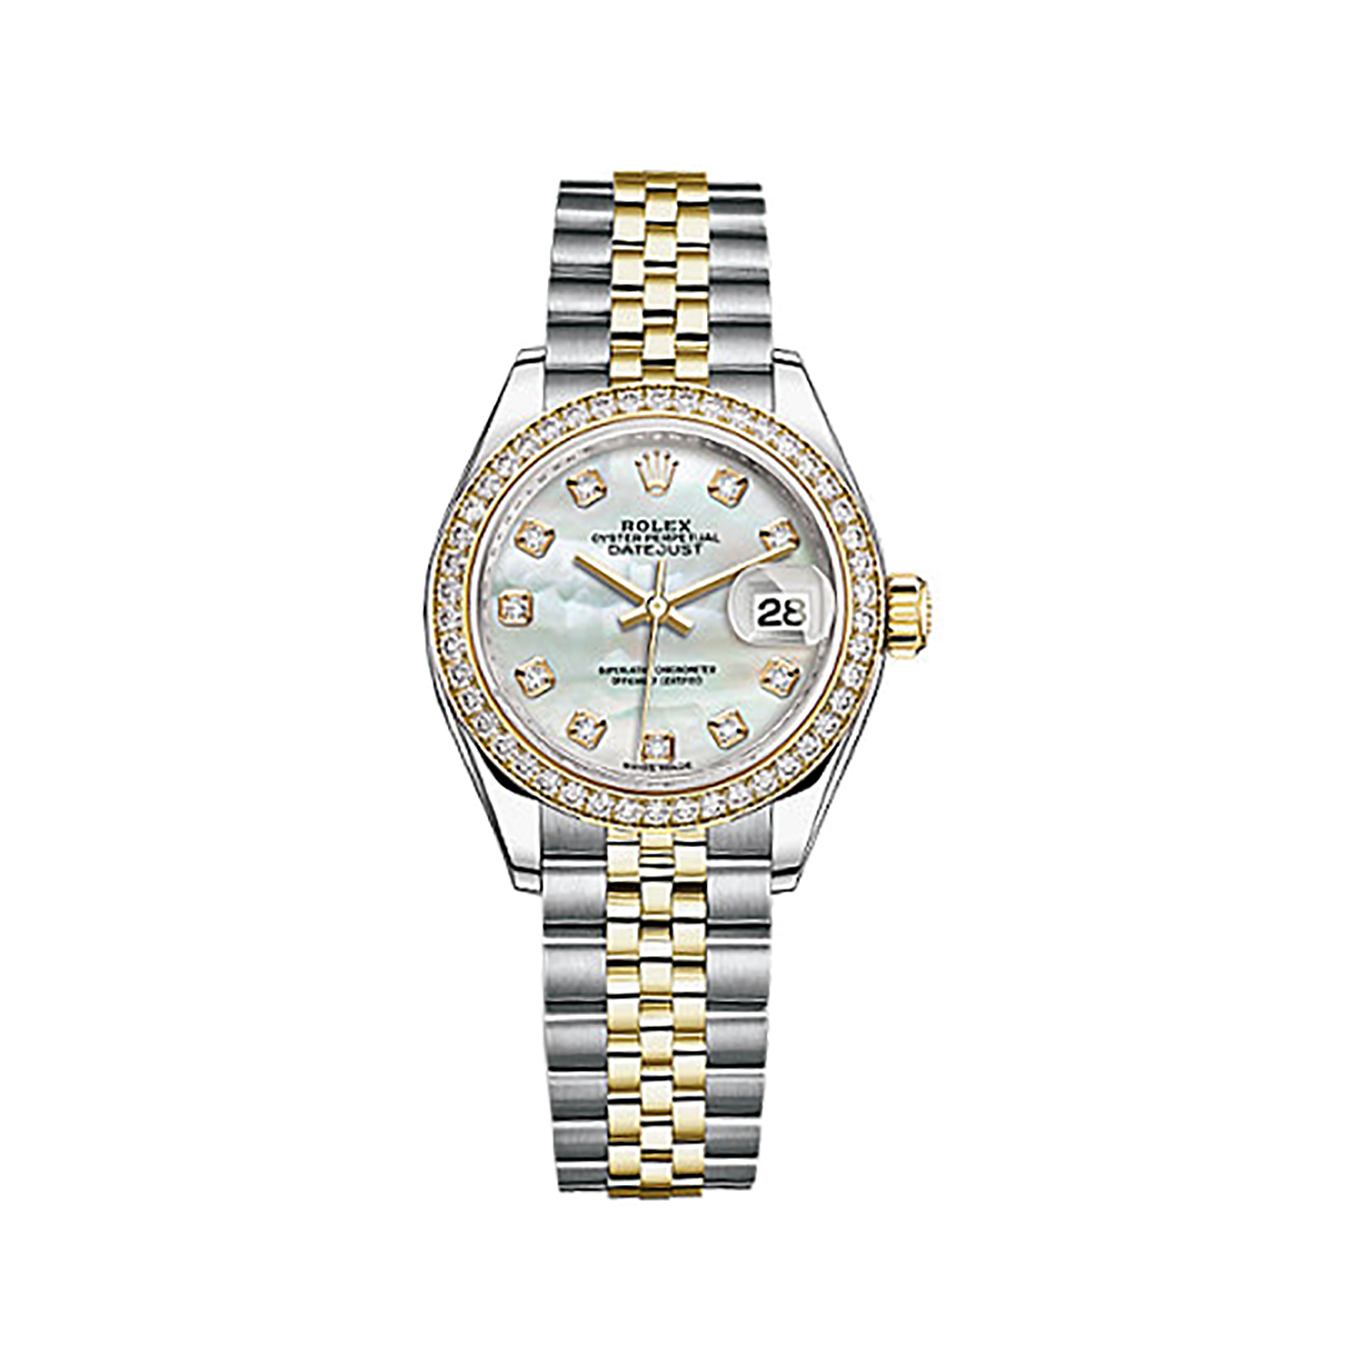 Lady-Datejust 28 279383RBR Gold & Stainless Steel & Diamonds Watch (White Mother-of-pearl Set with Diamonds)